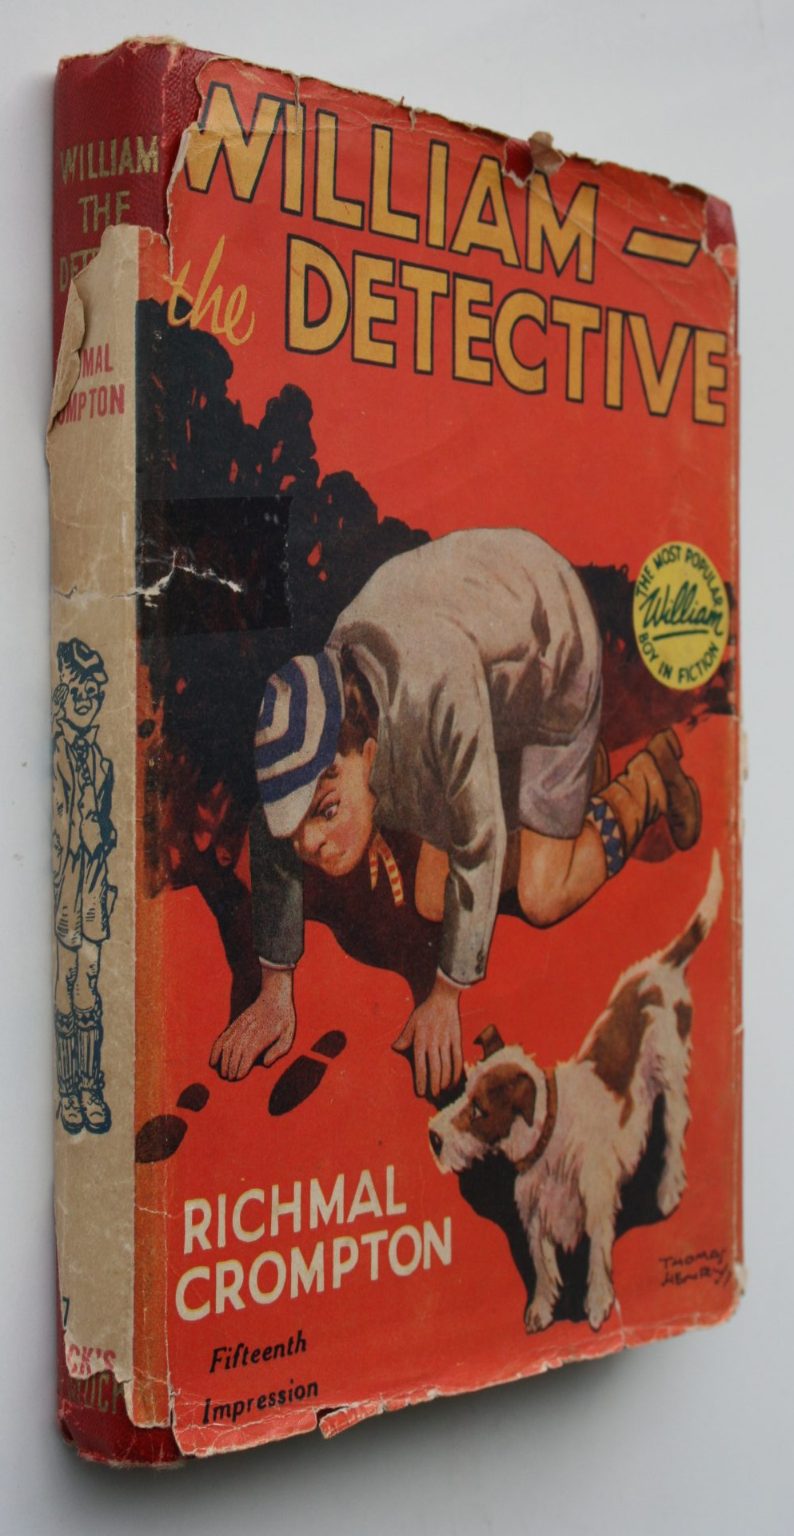 William - The Detective by Richmal Crompton. (First Aus edition 1950).